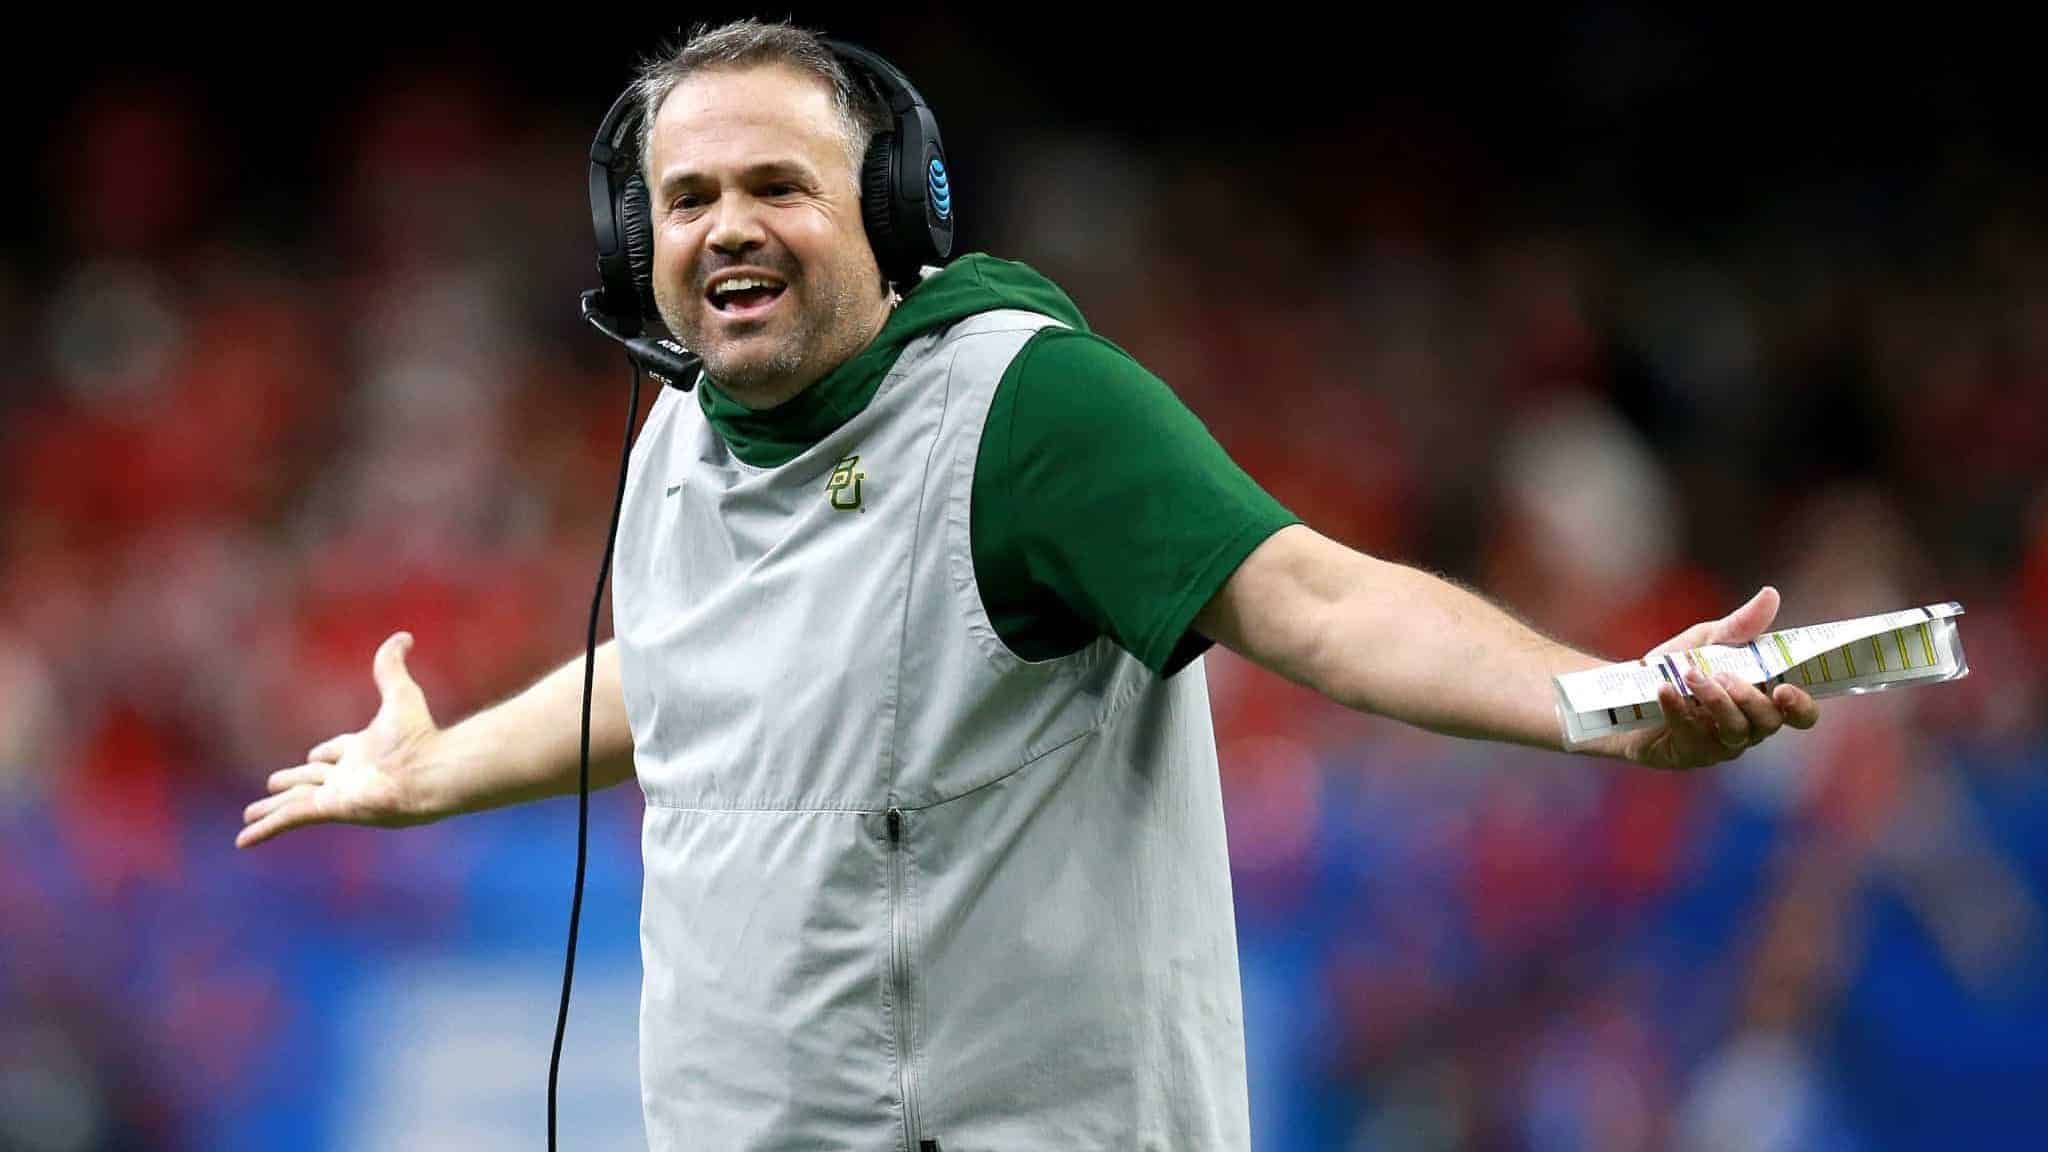 NEW ORLEANS, LOUISIANA - JANUARY 01: Head coach Matt Rhule of the Baylor Bears looks on during the Allstate Sugar Bowl against the Georgia Bulldogs at Mercedes Benz Superdome on January 01, 2020 in New Orleans, Louisiana.